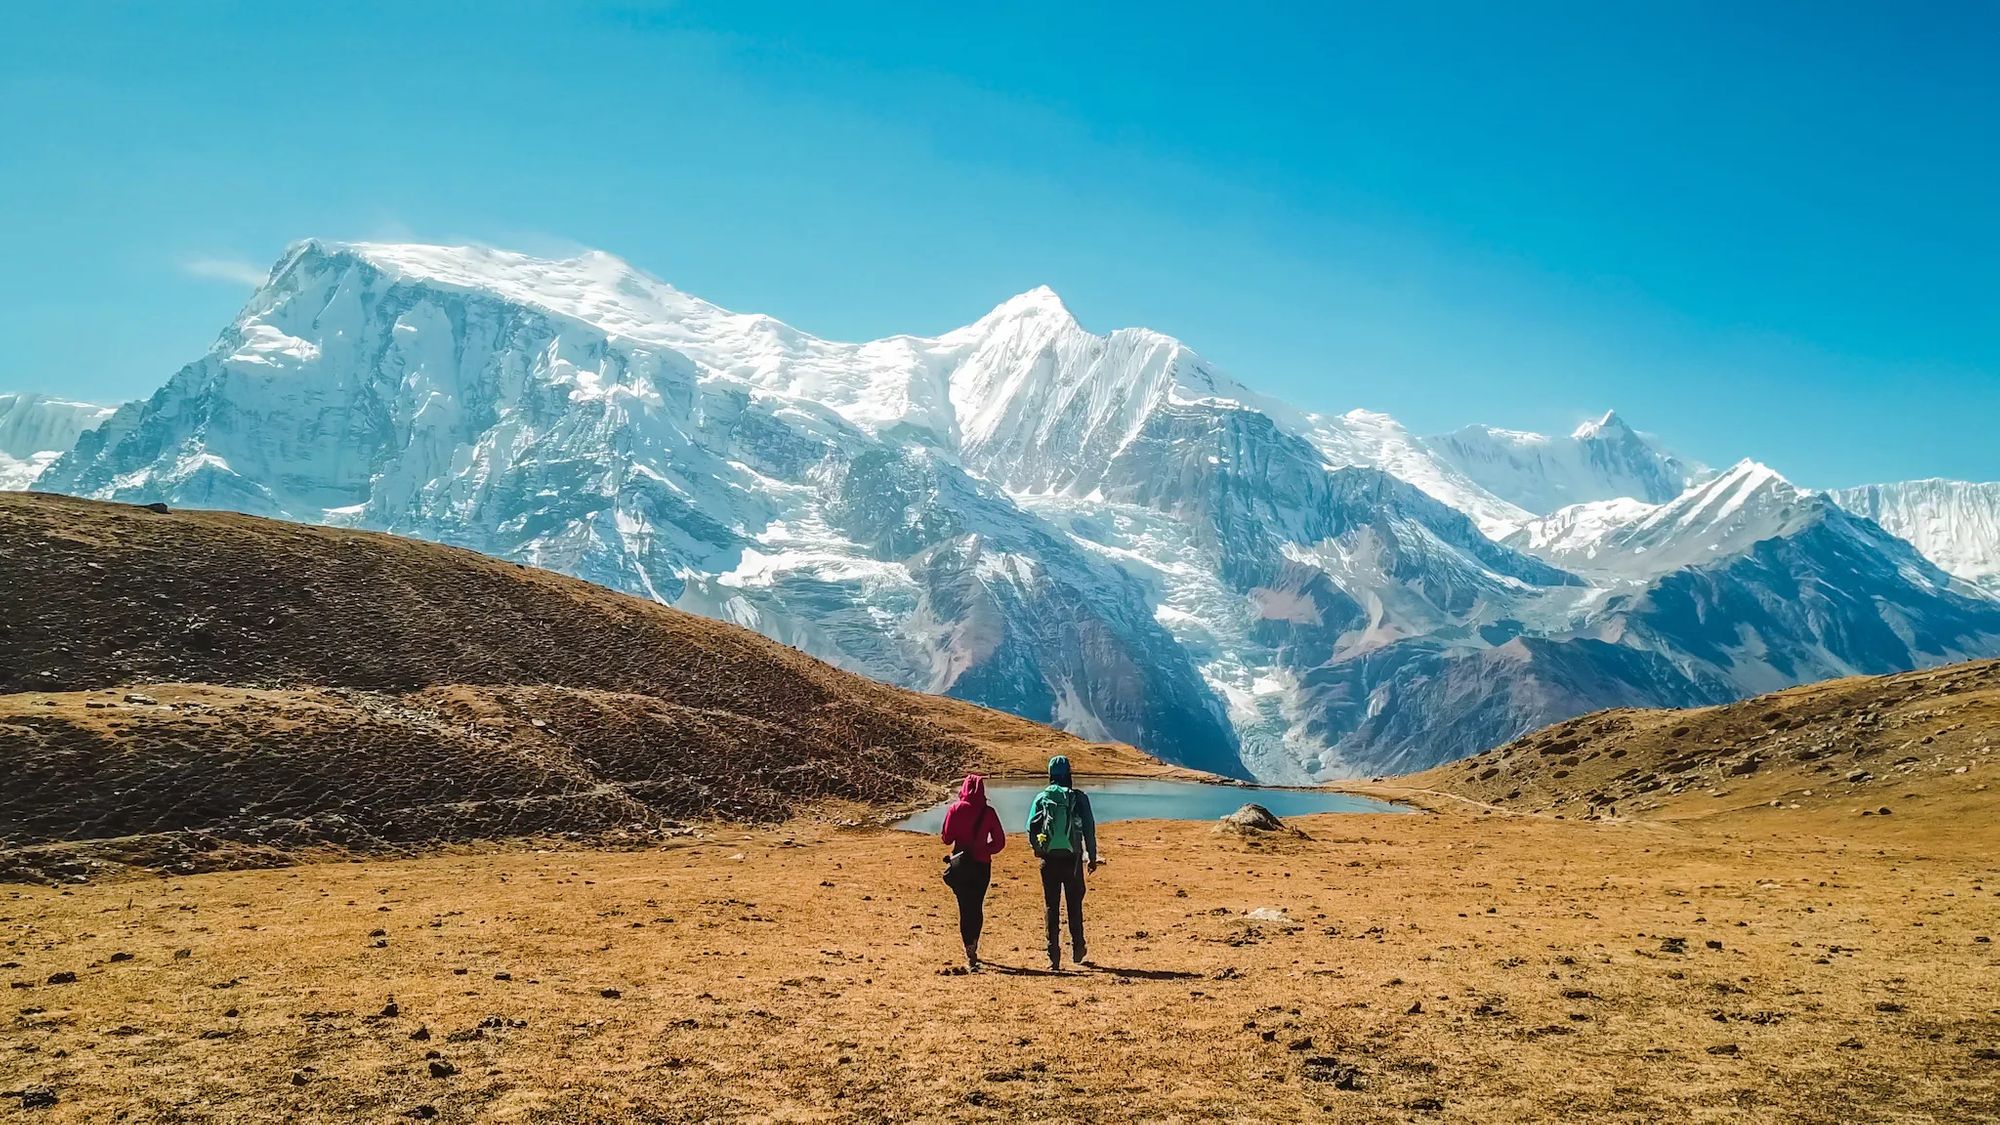 Two hikers stare out at the Annapurna massif in Nepal.